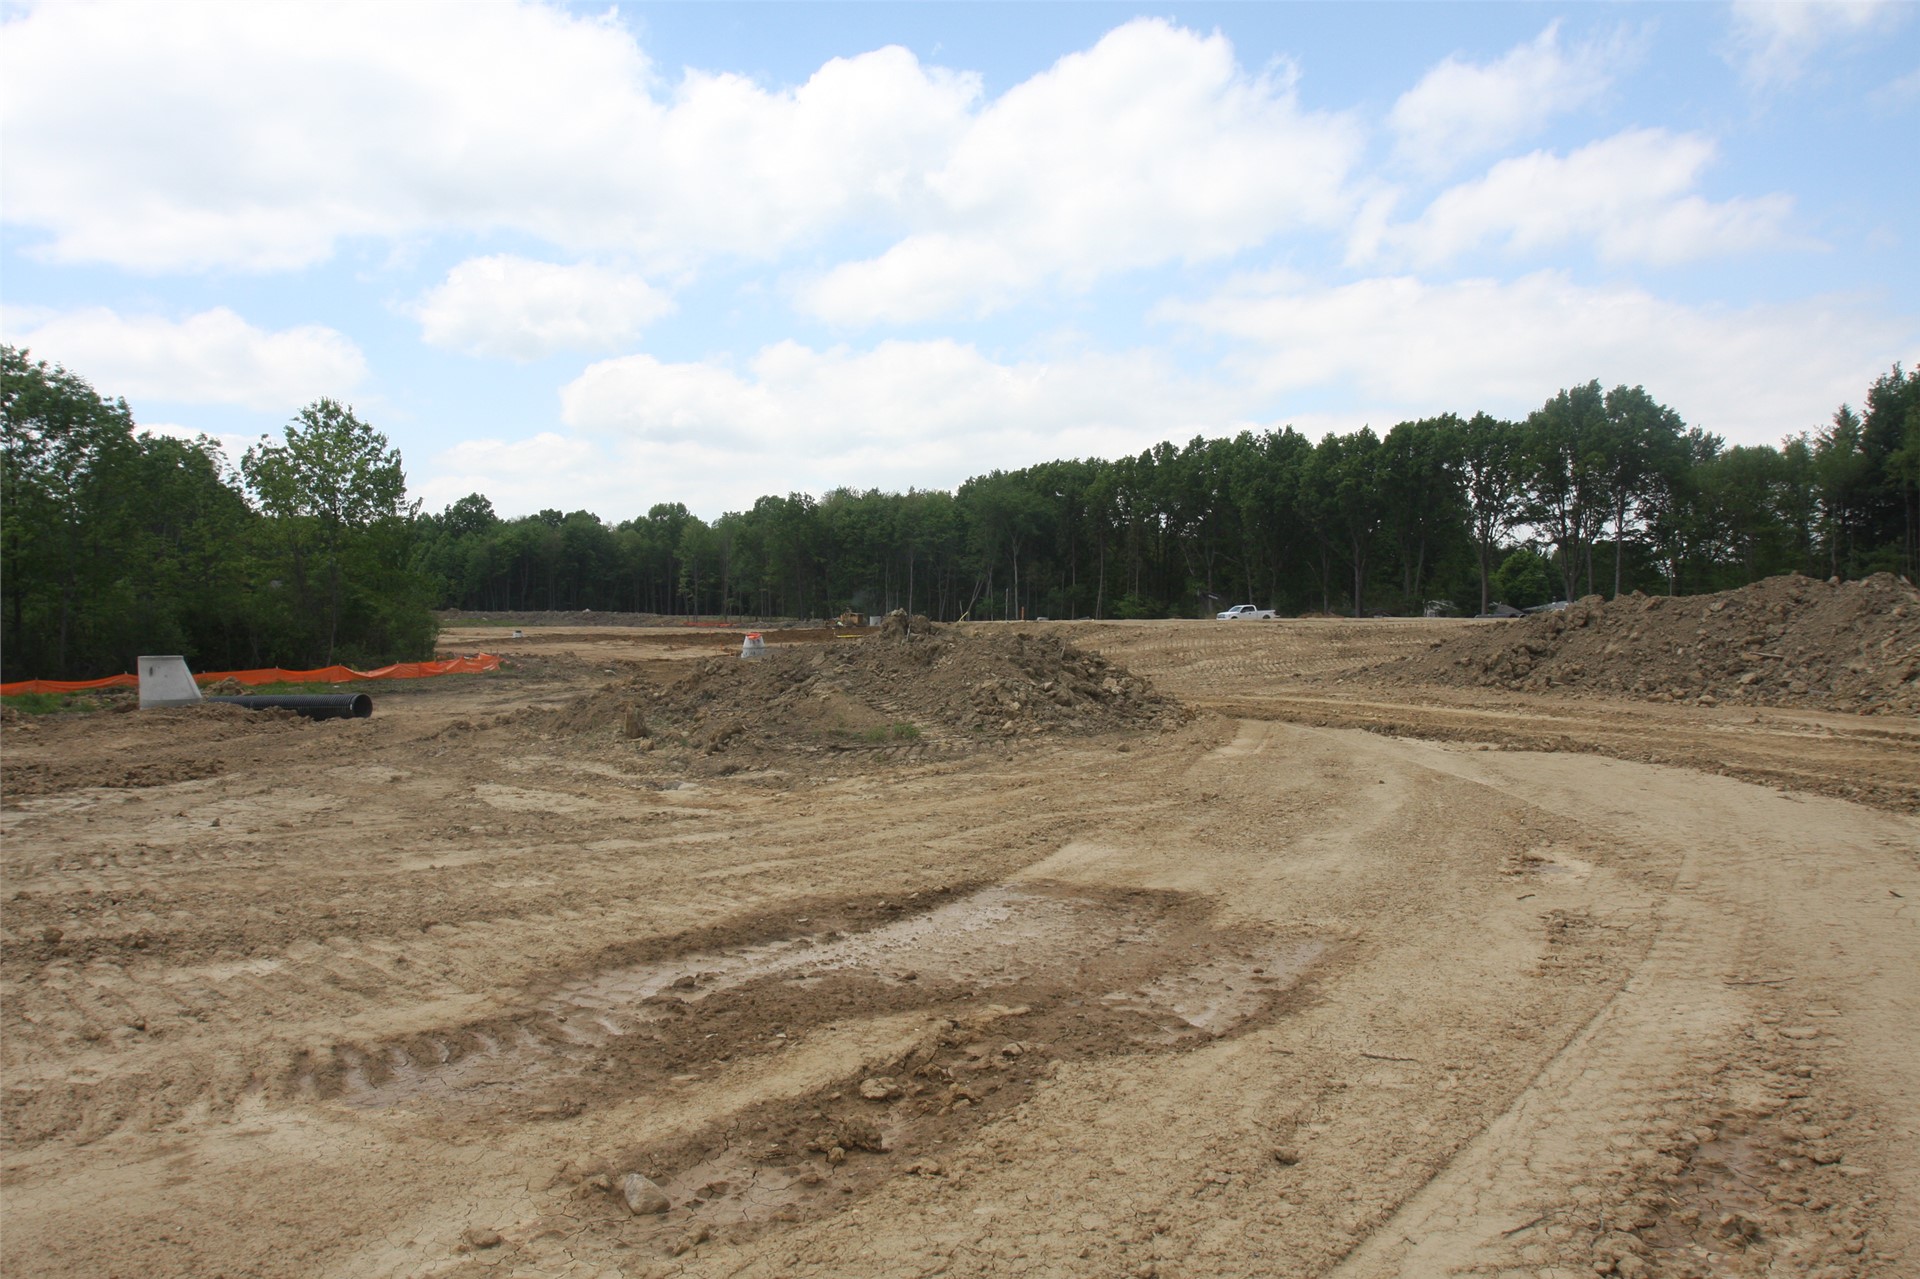 View of HS site from driveway (at end of retention basin coming from Cleve-Mass)